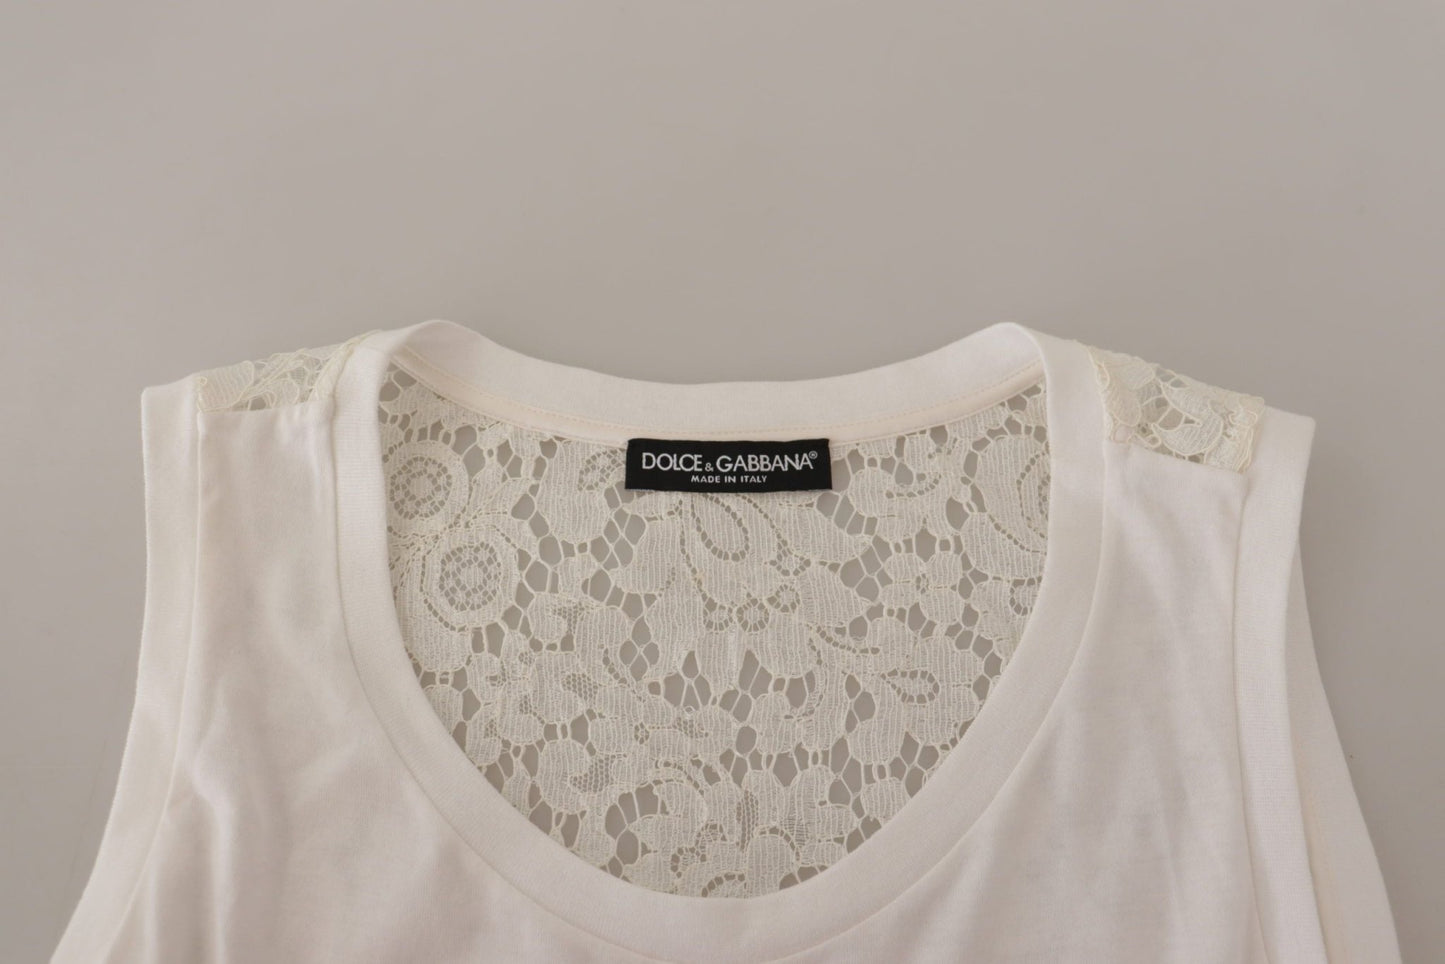 Dolce & Gabbana White Embellished Embroidered Print Blouse T-shirt